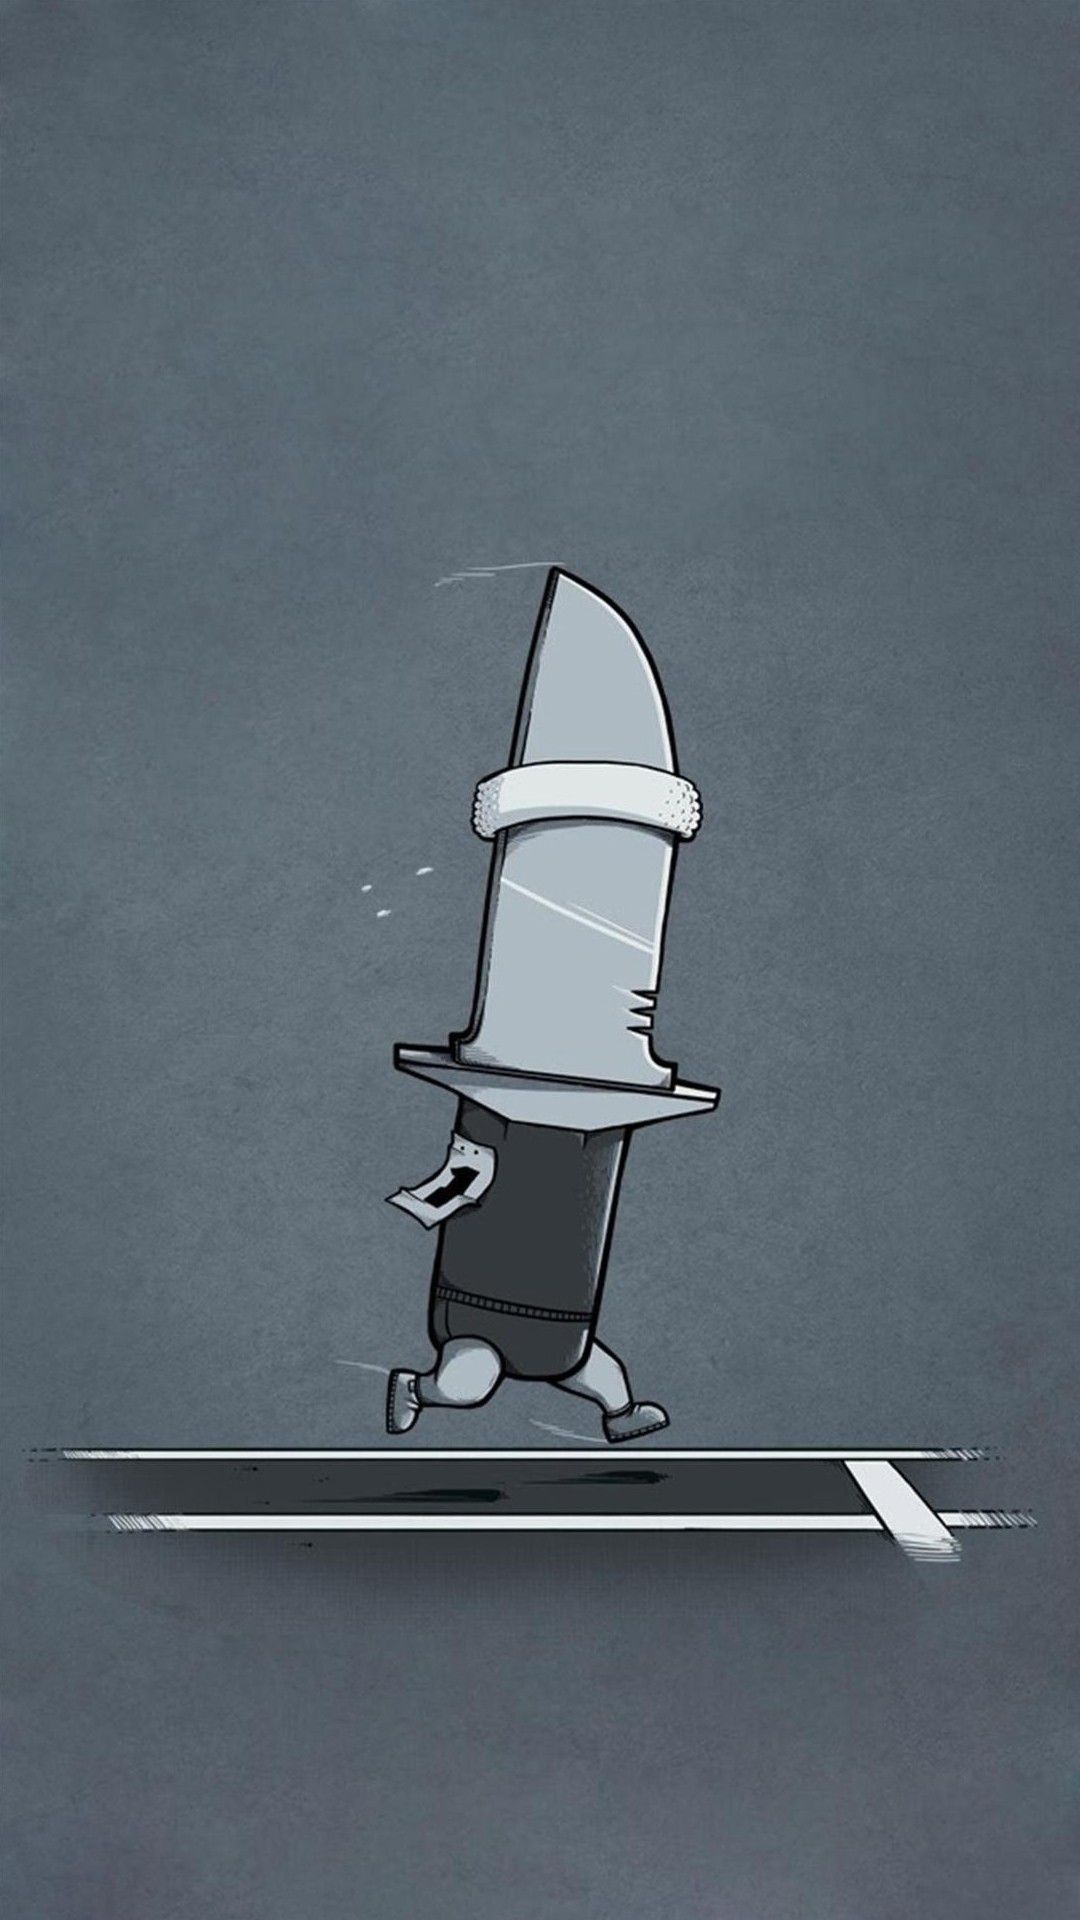 The running knife. Tap for more cute and funny cartoon iPhone